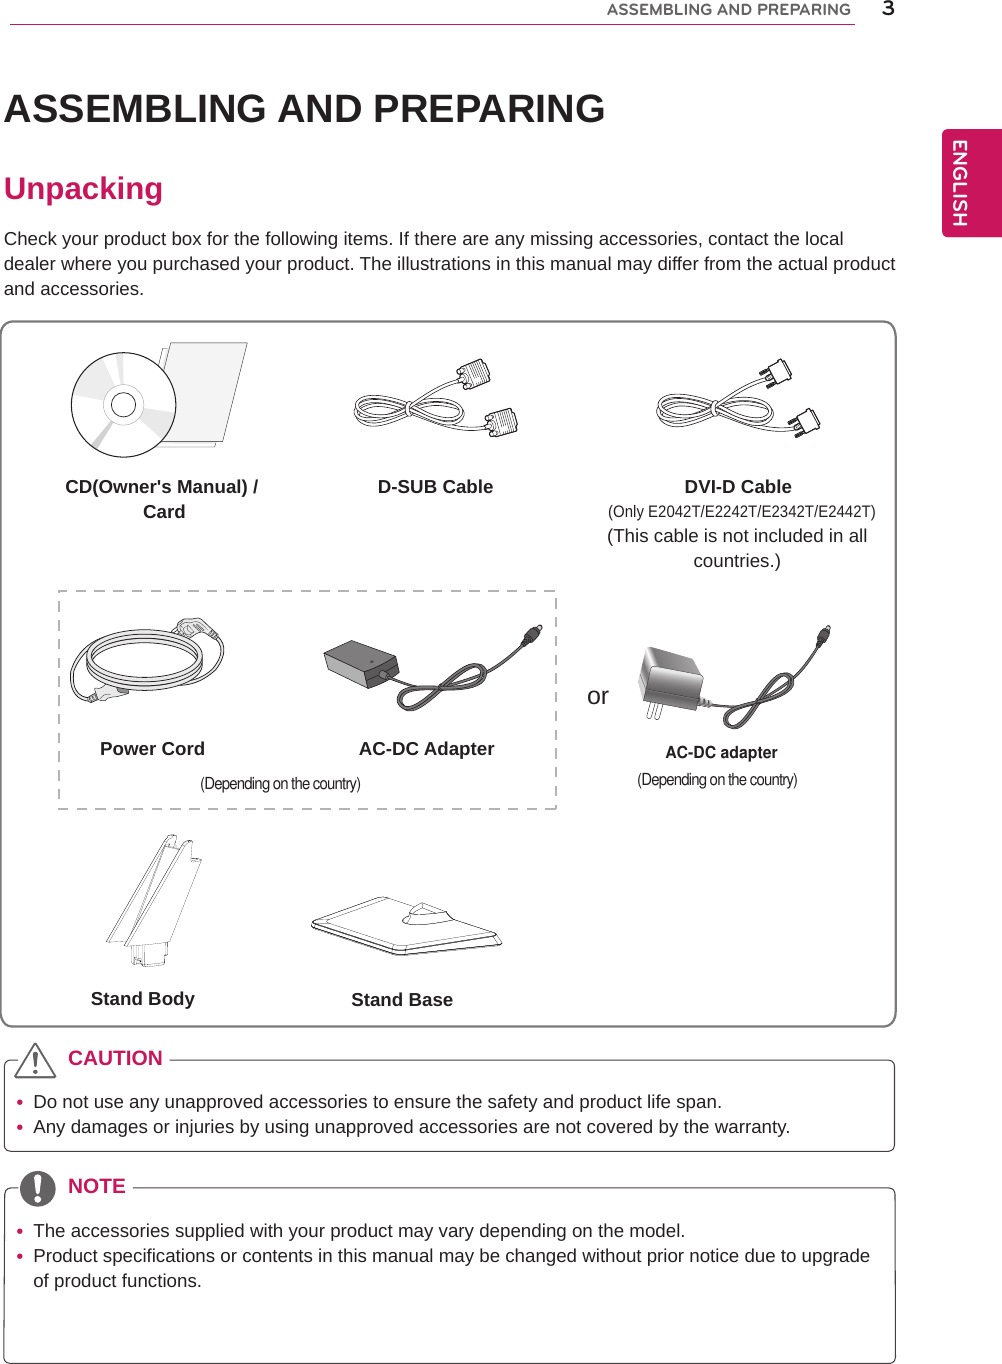 3ENGENGLISHASSEMBLING AND PREPARINGASSEMBLING AND PREPARINGUnpackingCheck your product box for the following items. If there are any missing accessories, contact the local dealer where you purchased your product. The illustrations in this manual may differ from the actual product and accessories. yDo not use any unapproved accessories to ensure the safety and product life span. yAny damages or injuries by using unapproved accessories are not covered by the warranty.  yThe accessories supplied with your product may vary depending on the model. yProduct specifications or contents in this manual may be changed without prior notice due to upgrade of product functions.CAUTIONNOTECD(Owner&apos;s Manual) / Card D-SUB Cable DVI-D Cable(This cable is not included in all countries.)orPower Cord AC-DC AdapterAC-DC adapter(Depending on the country)(Only E2042T/E2242T/E2342T/E2442T)Stand Body Stand Base(Depending on the country)